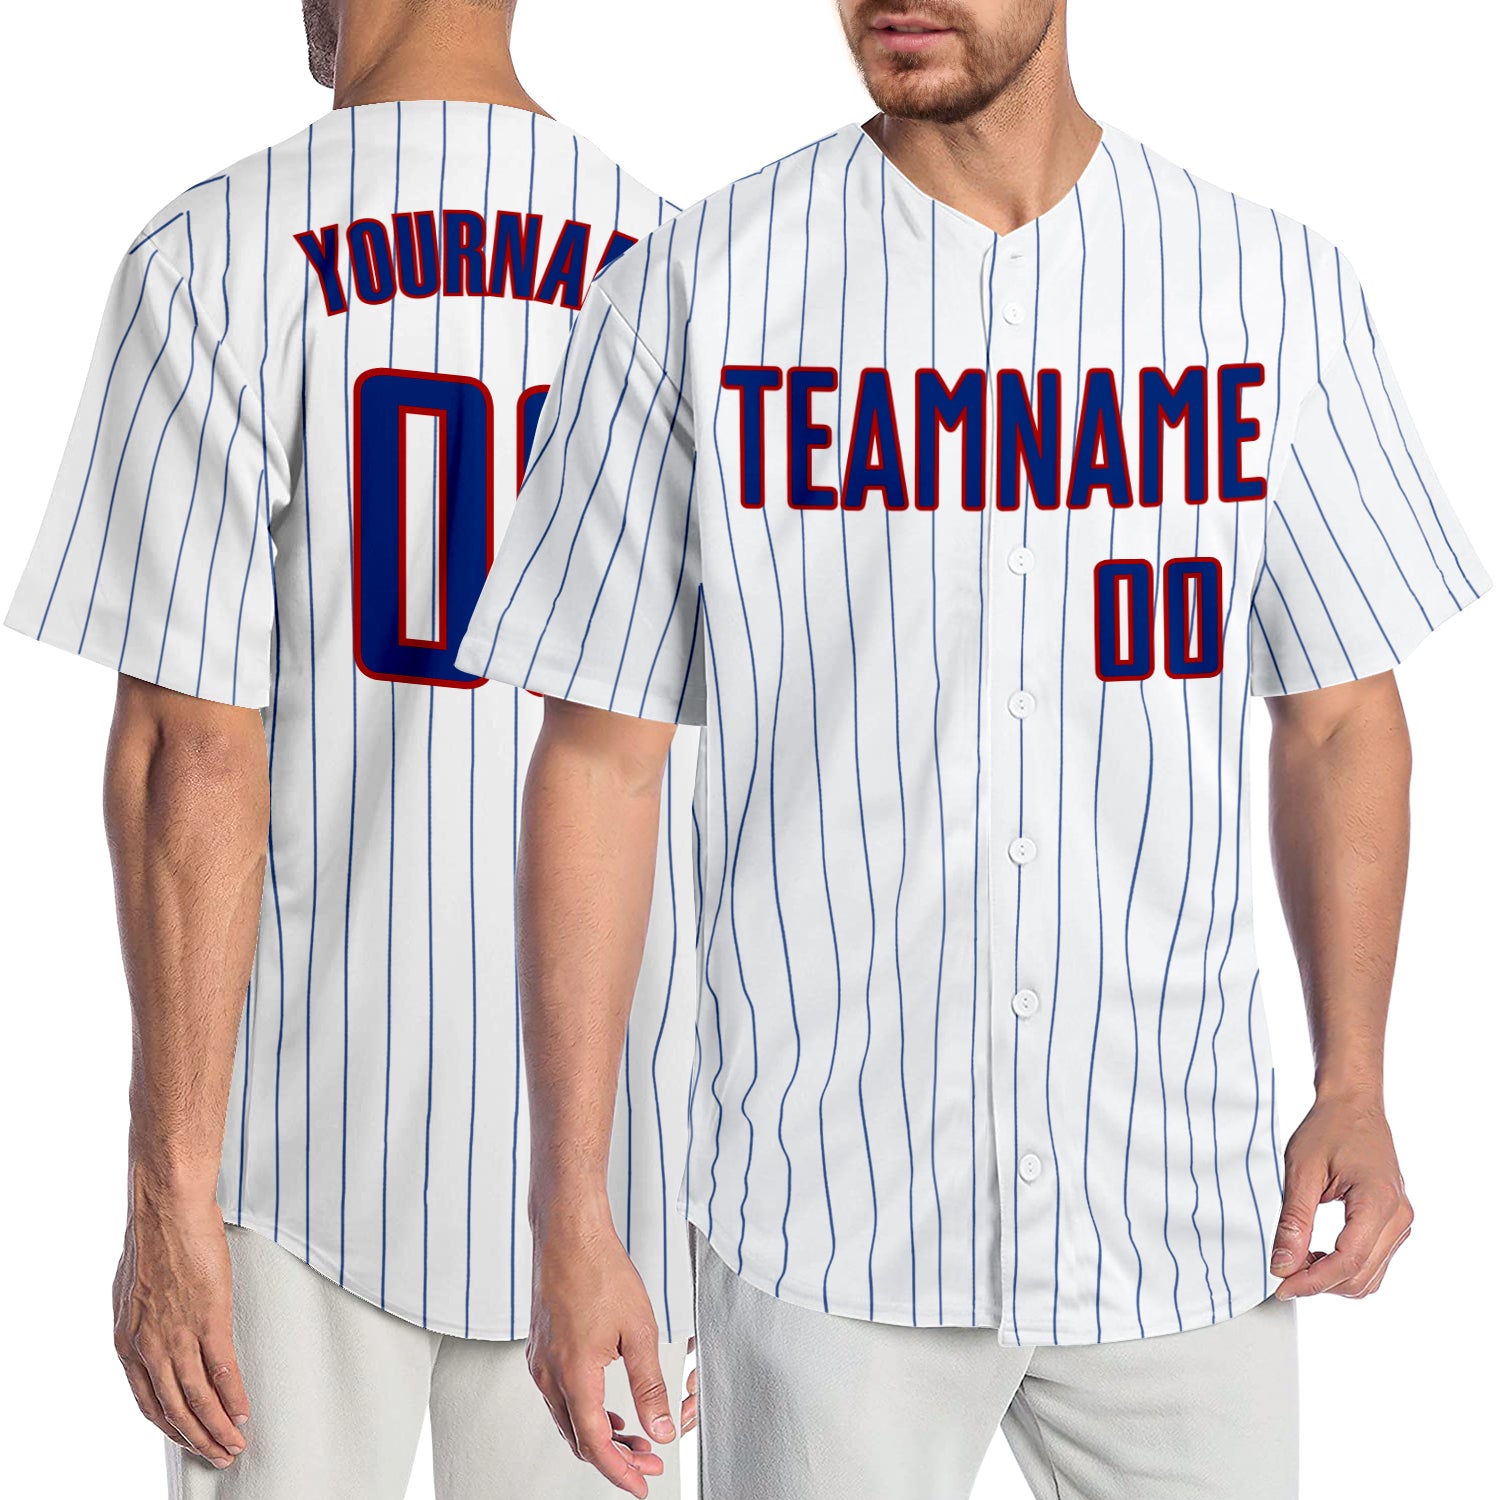 Custom White Royal-Red Authentic Baseball Jersey